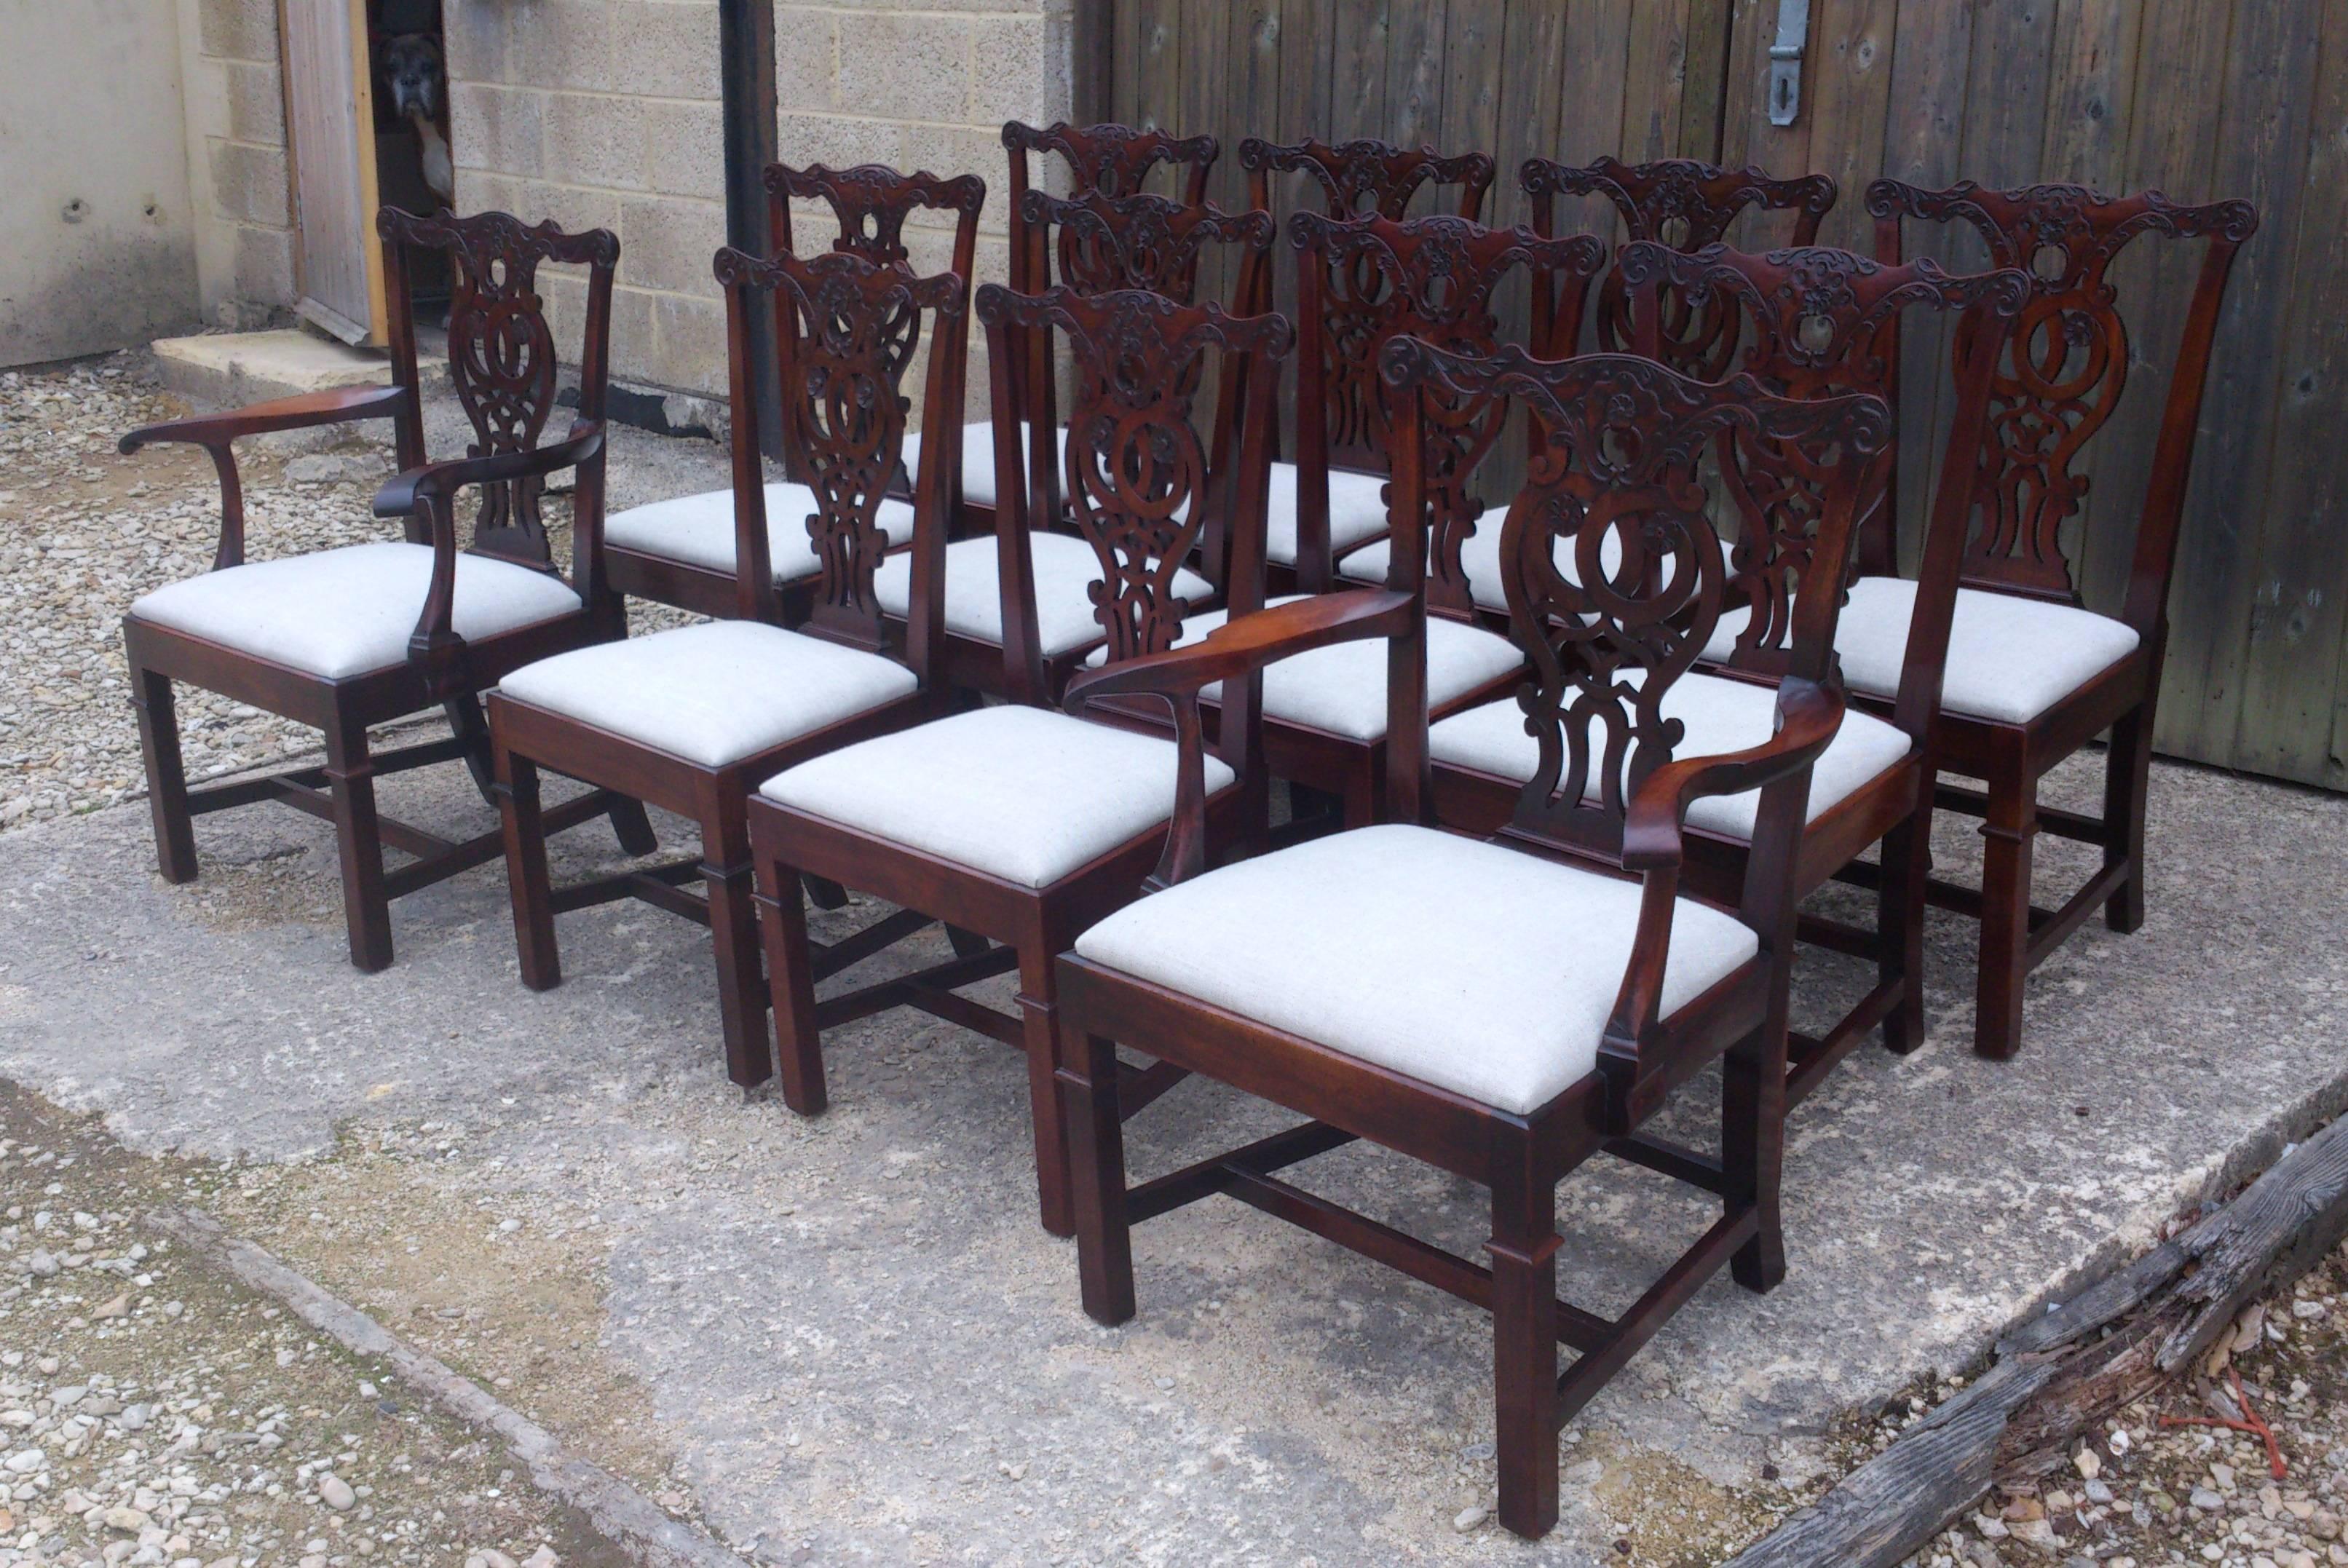 This set of 12 19th century antique Chippendale dining chairs are made to a design that originated in the George III period of the 18th century. These antique dining chairs are large, solid and made of a good quality dense grained mahogany. The